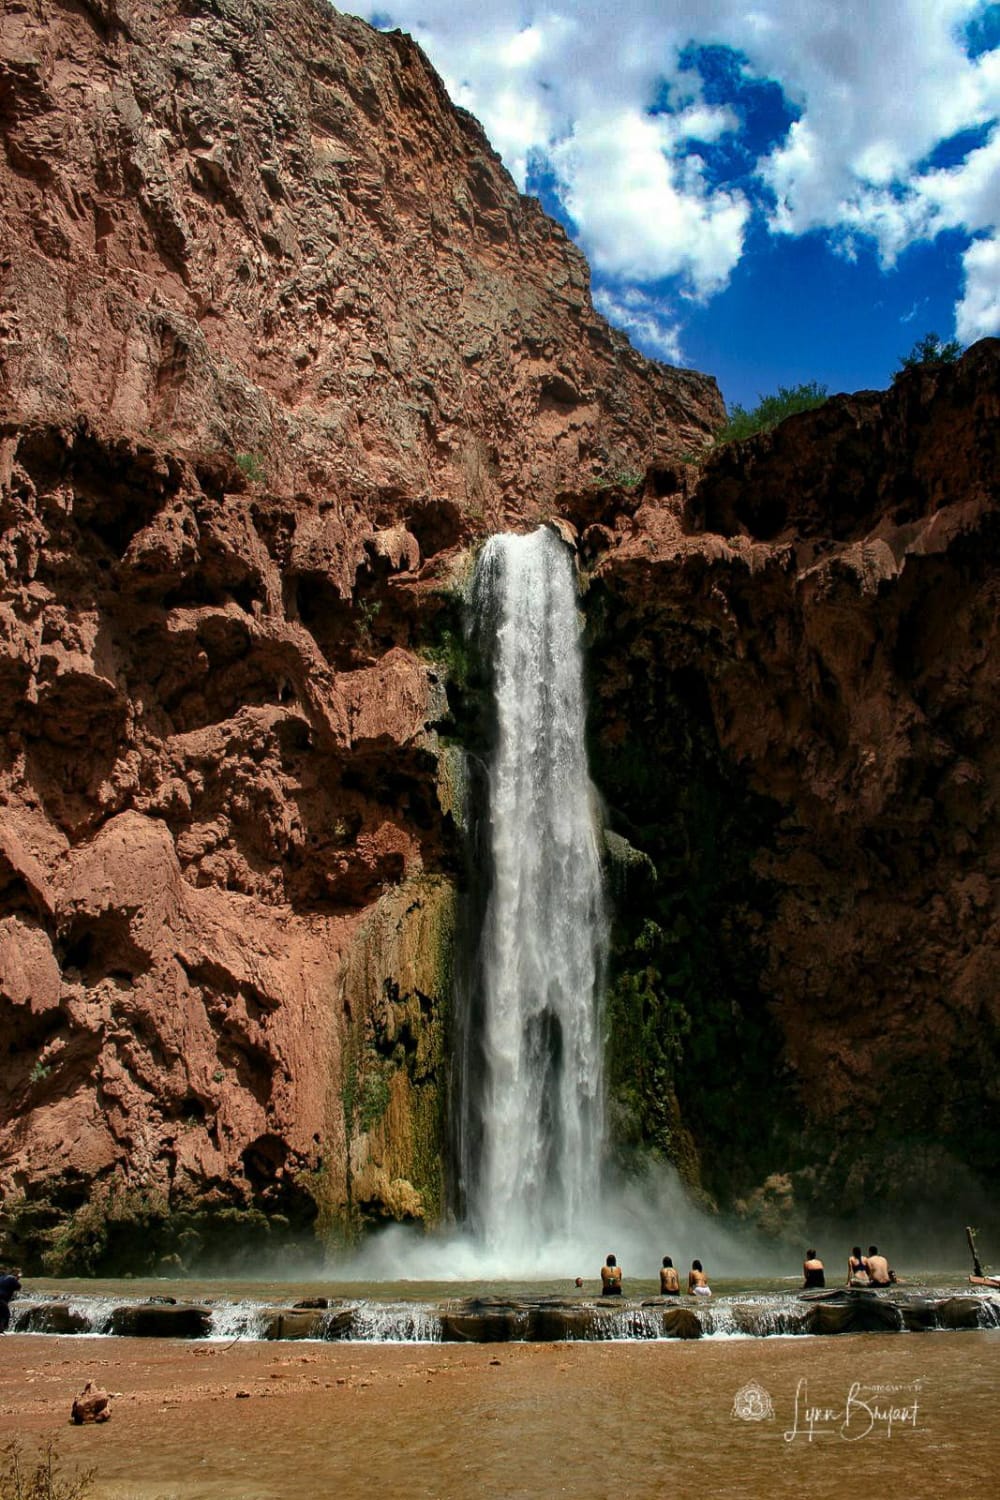 Moody Falls in the Havasu owned area of the Grand Canyon